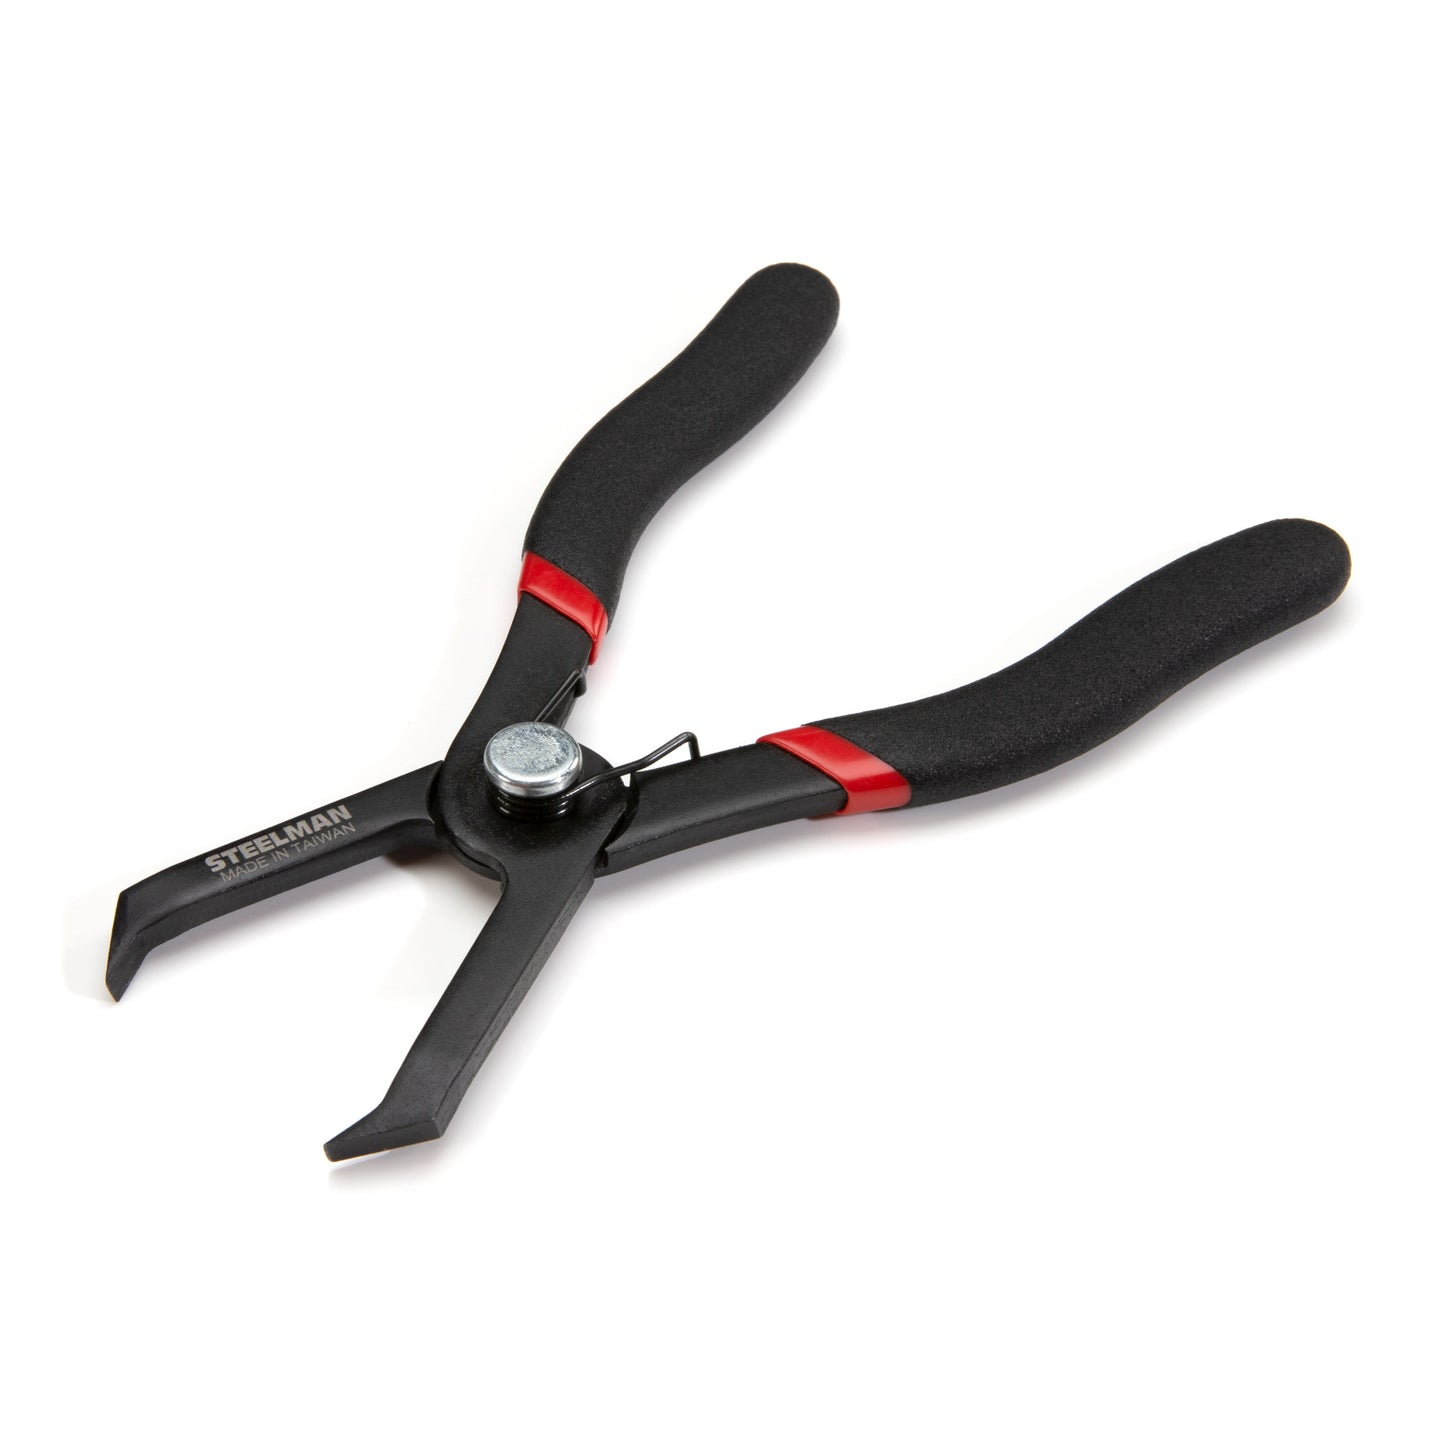 30-degree Offset Push Pin and Trim Anchor Pliers